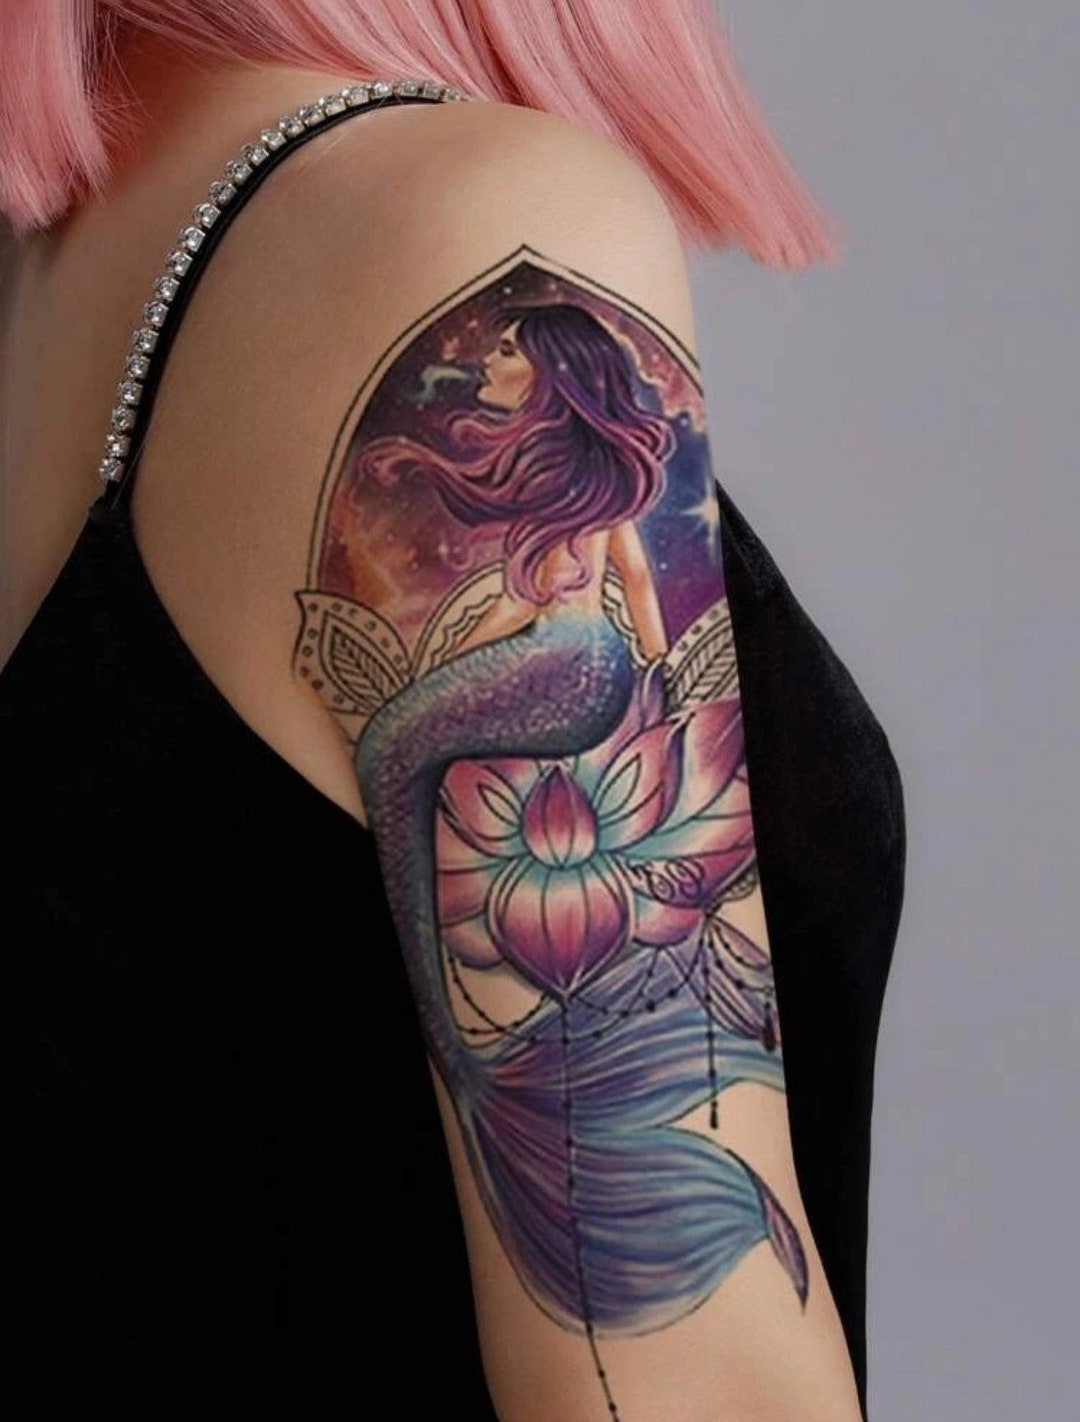 In love with my new mermaid tattoo and wanted to share (Tattoo done by:  Joshua Orville at Catalyst Tattoo in Kansas City, MO. He is now out of  Definitive Tattoo in Kansas